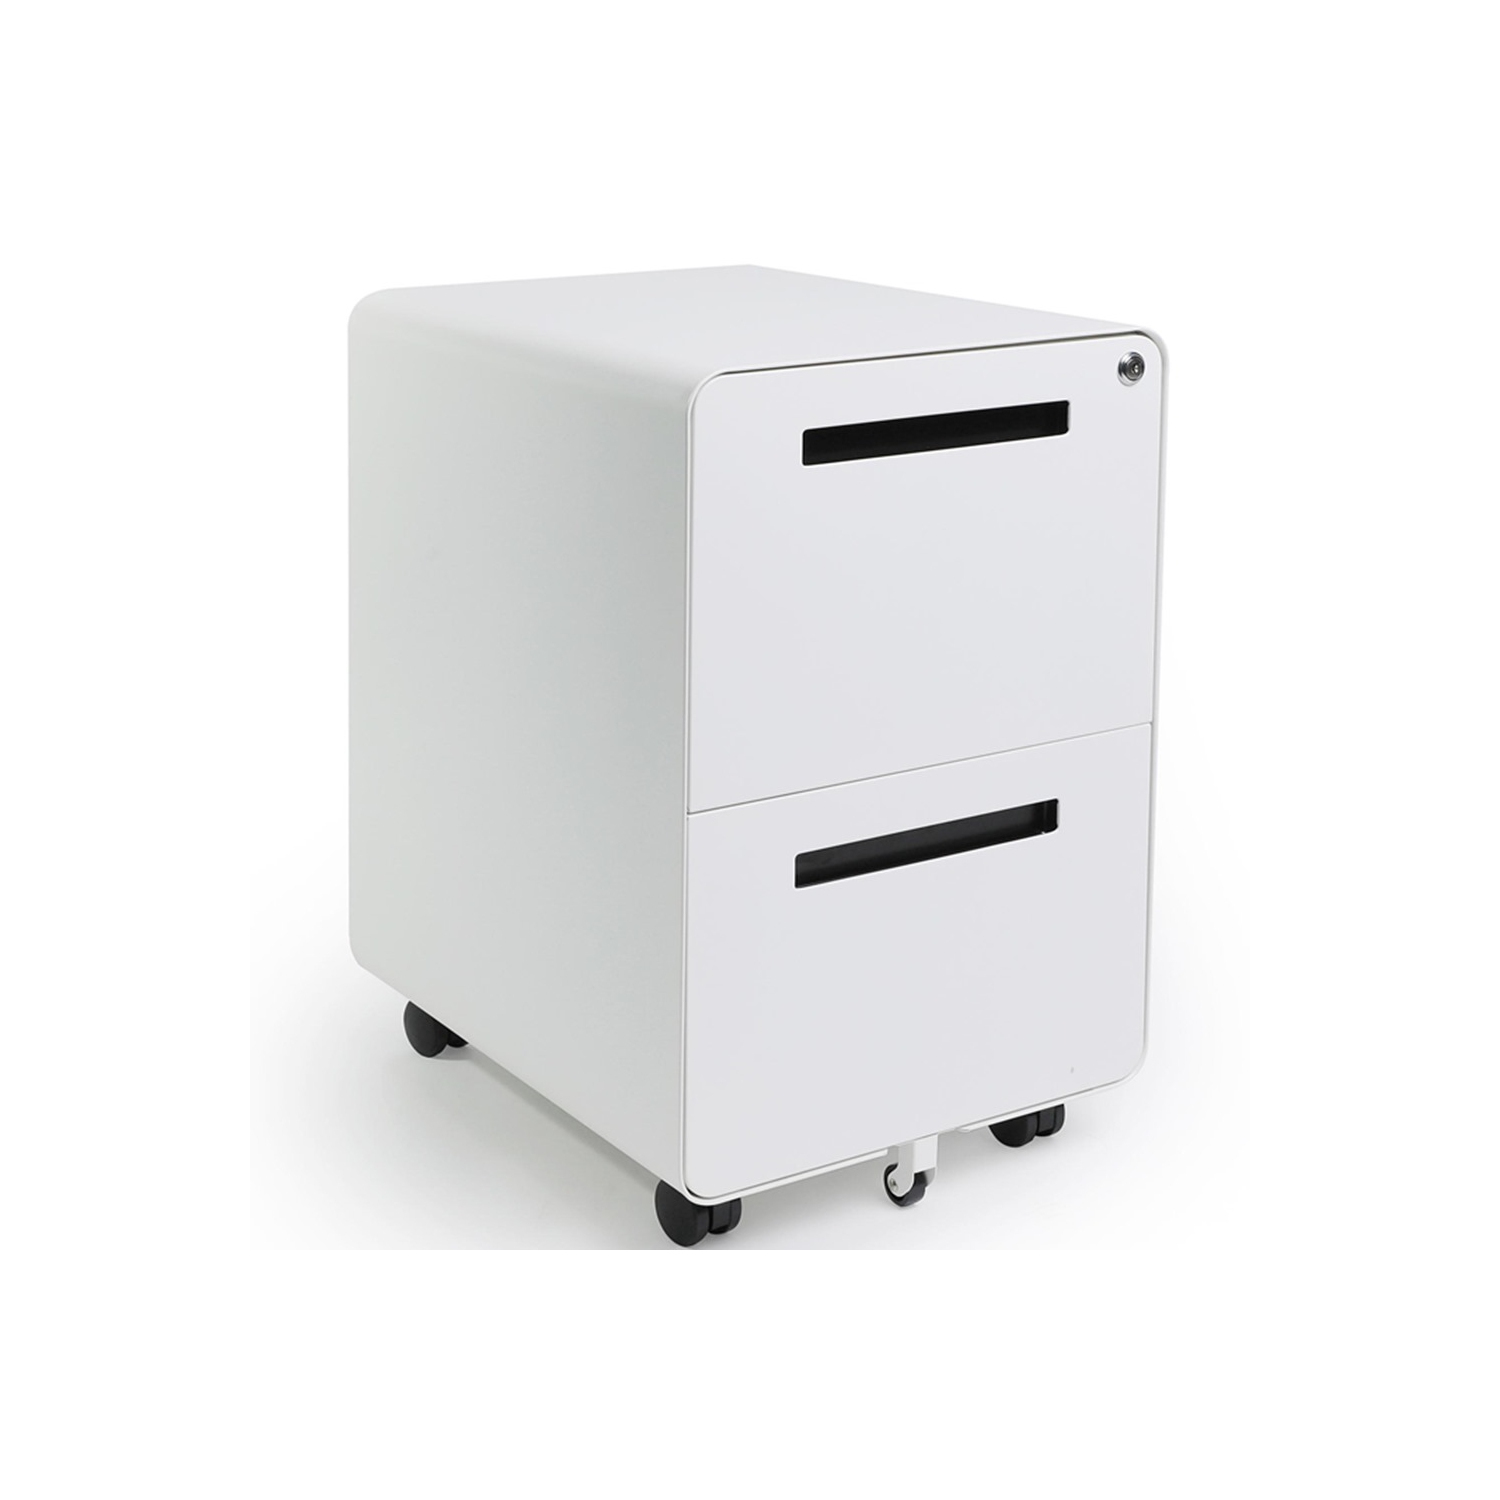 2-Drawer Mobile Steel Pedestal File Cabinet with Lock and Round Edge - Moustache® - White（with 1 x Cabinet，5 x Castors，2 x Keys）Built-in Handle